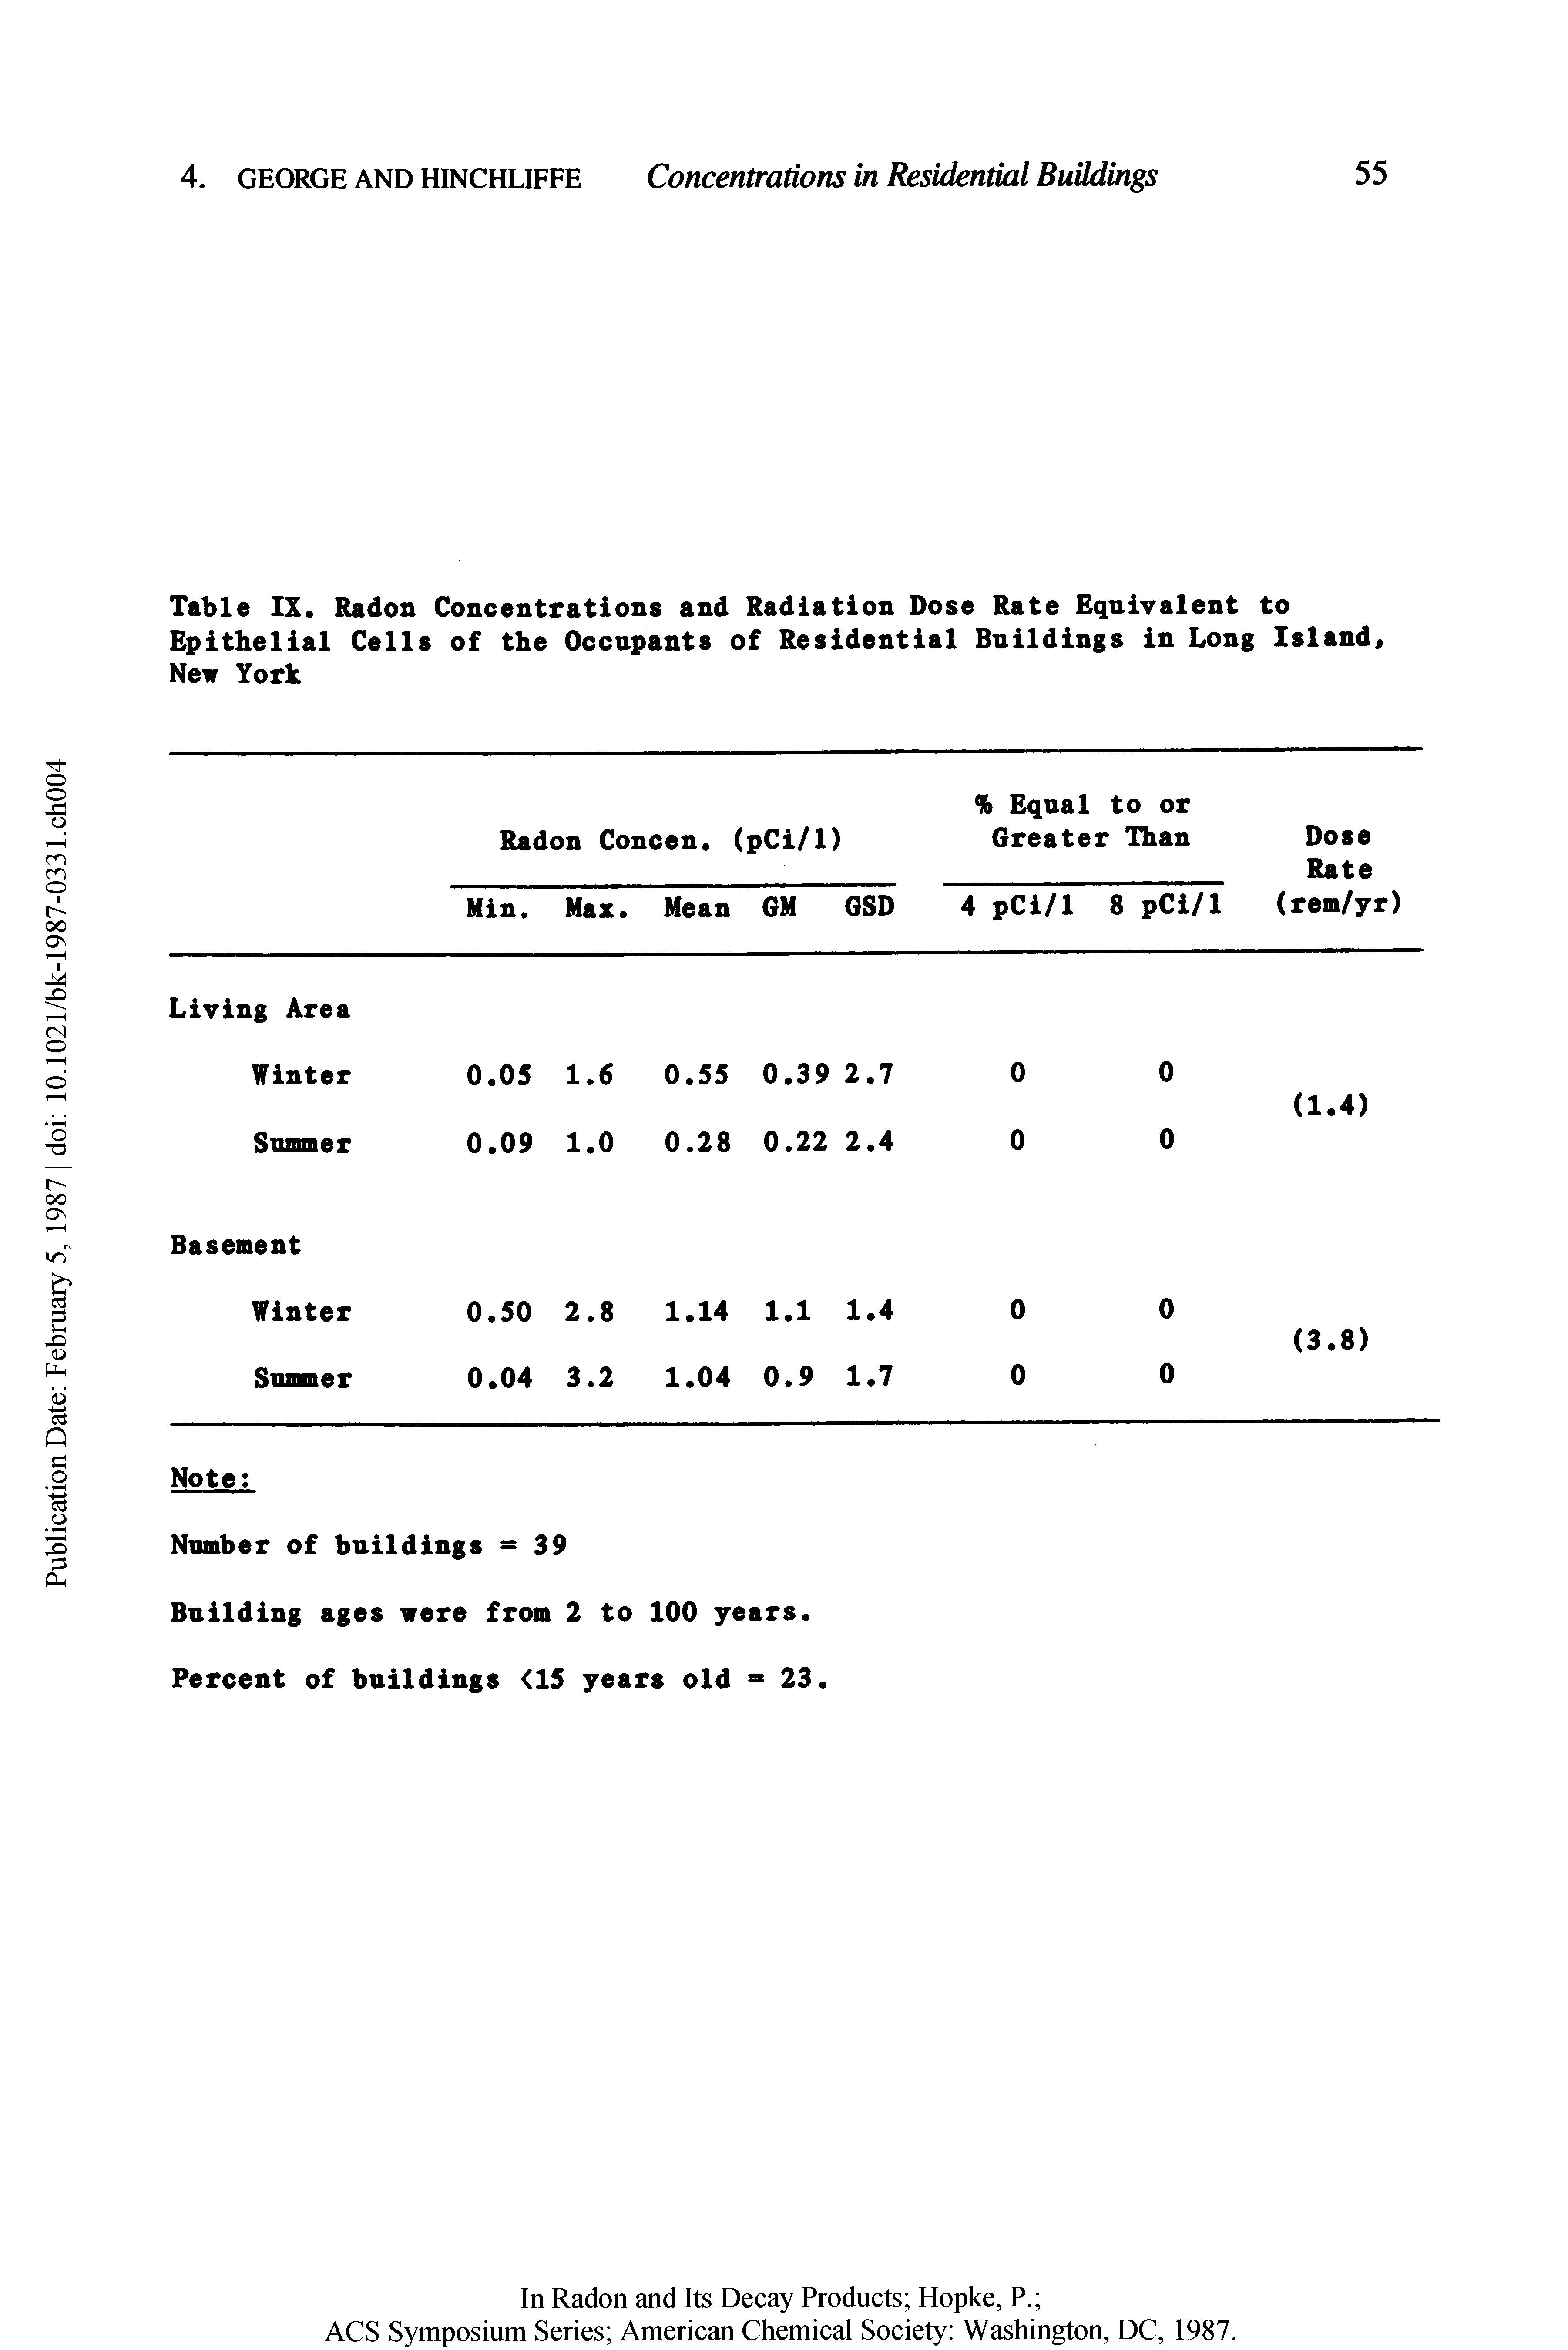 Table IX. Radon Concentrations and Radiation Dose Rate Equivalent to Epithelial Cells of the Occupants of Residential Buildings in Long Island, New York...